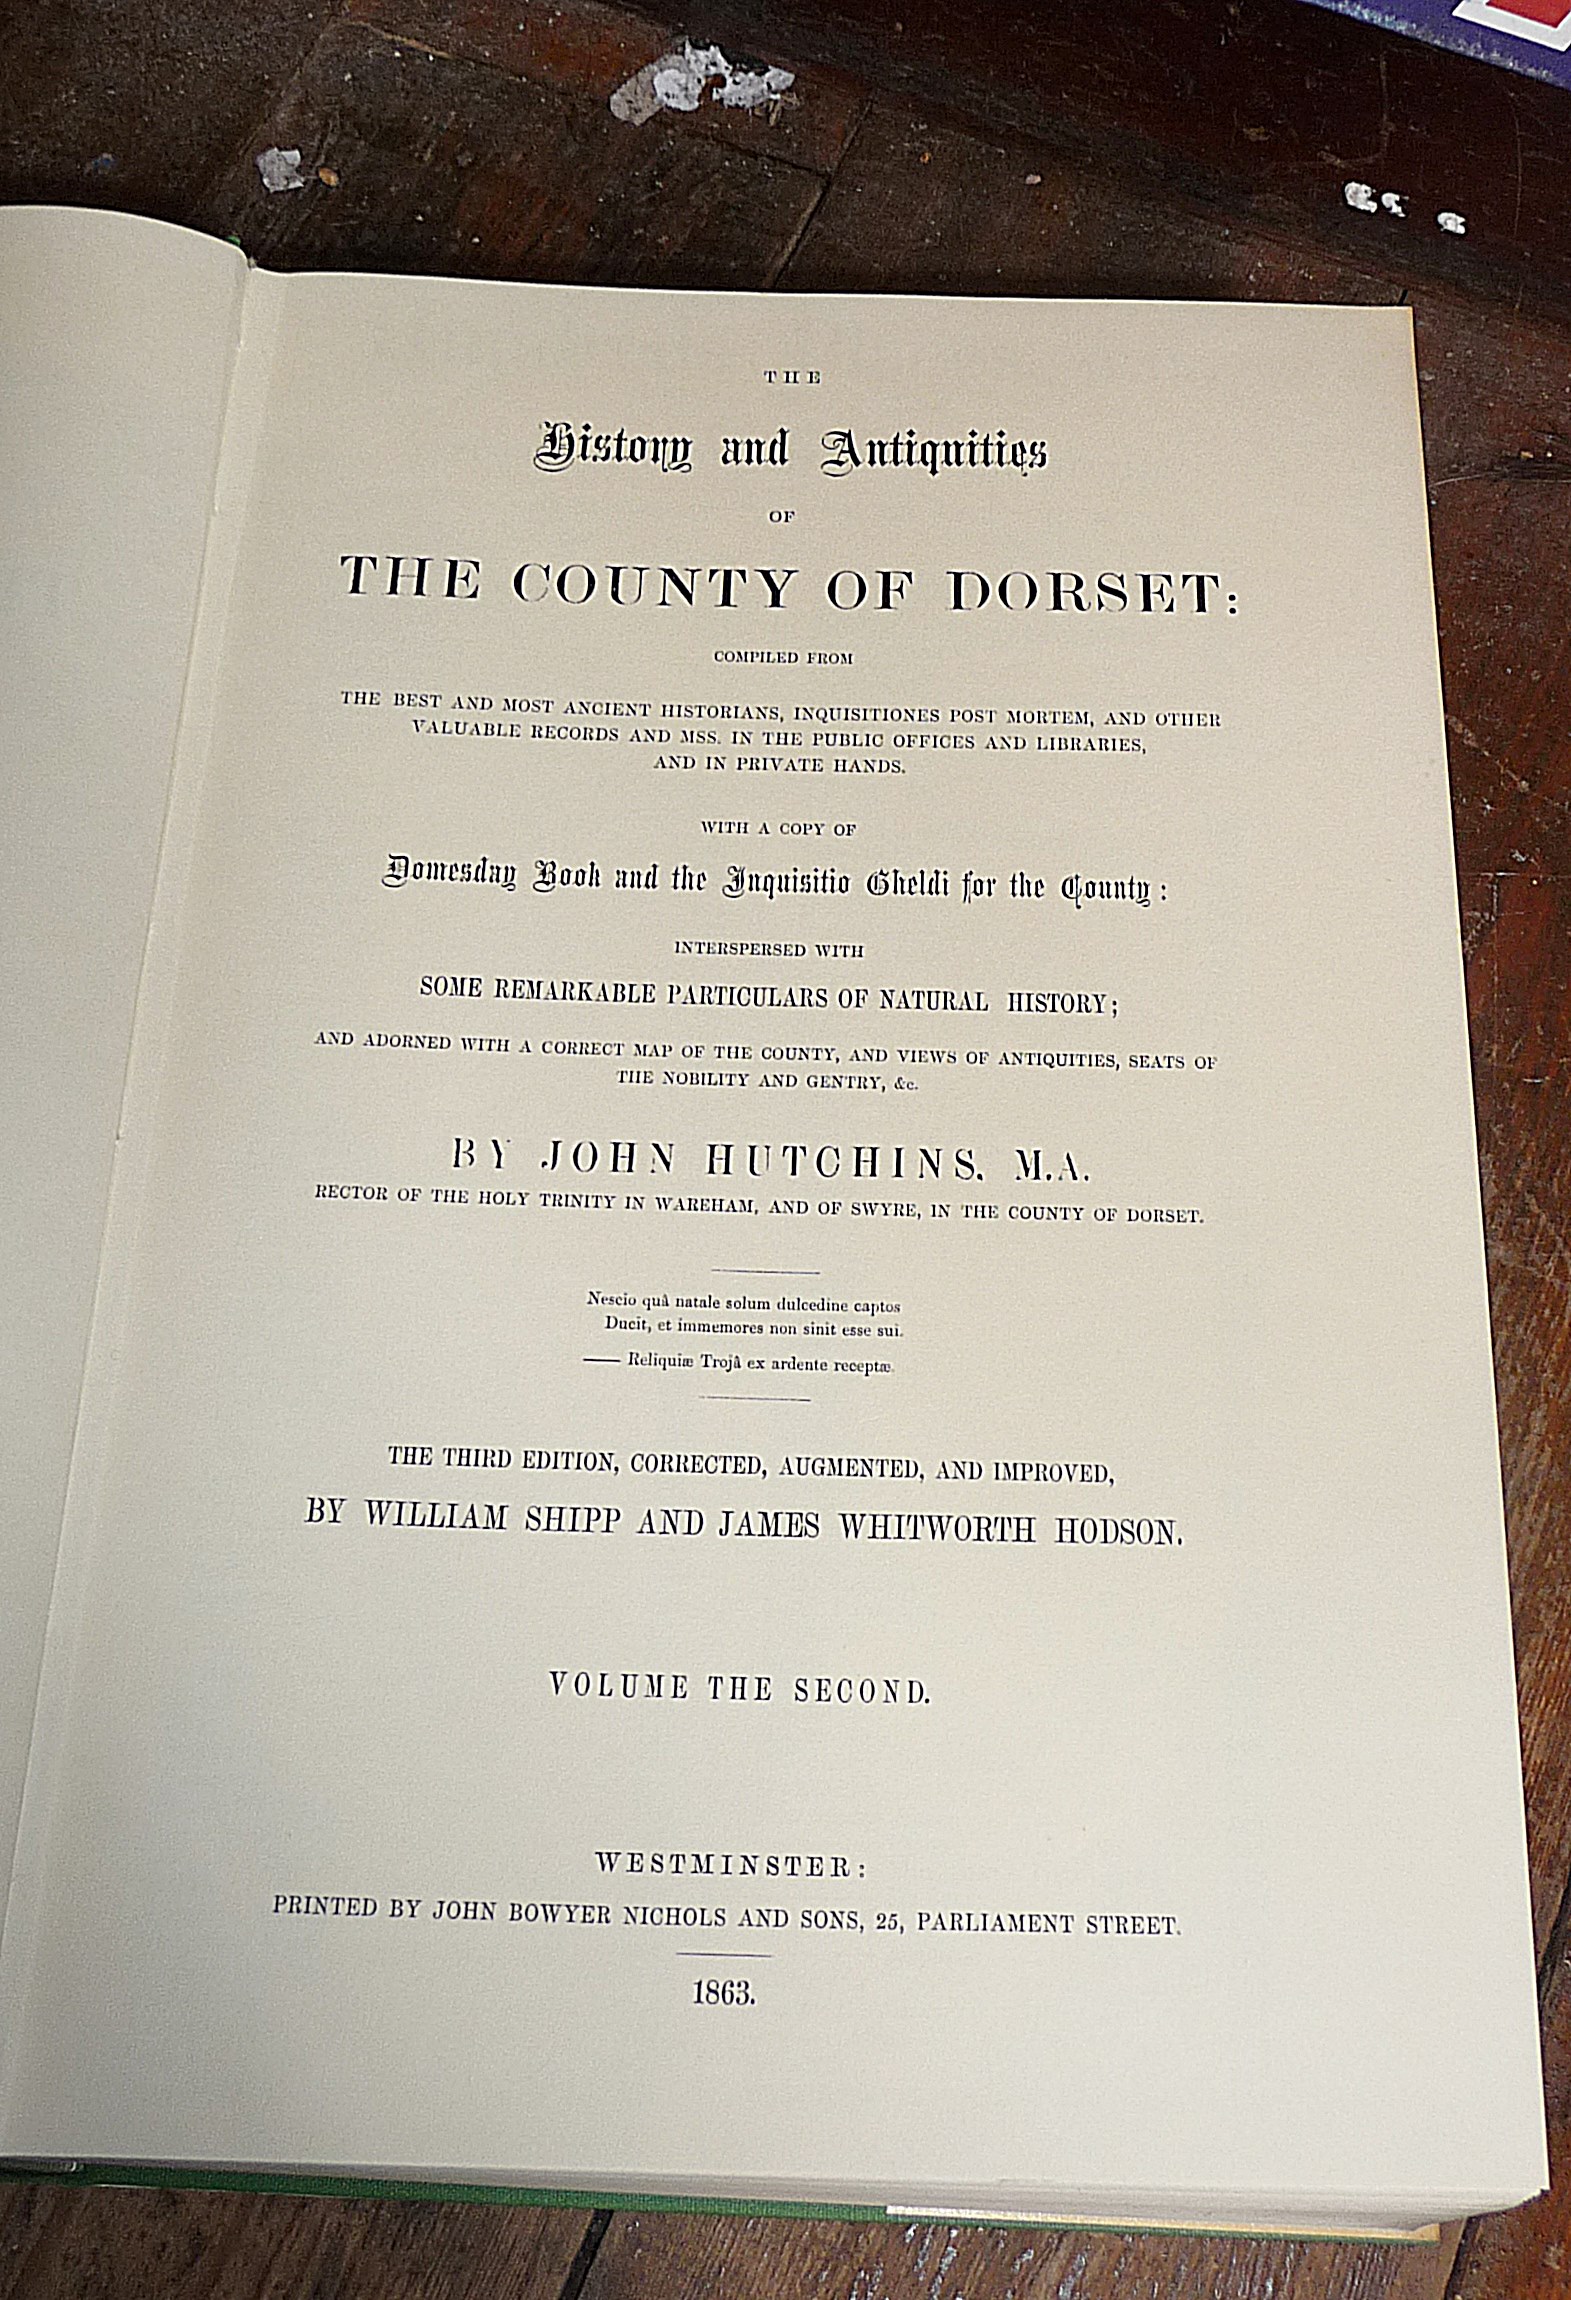 The History and Antiquities of the County of Dorset, John Hutchins Vol II, Third Edition, reprint - Image 3 of 4